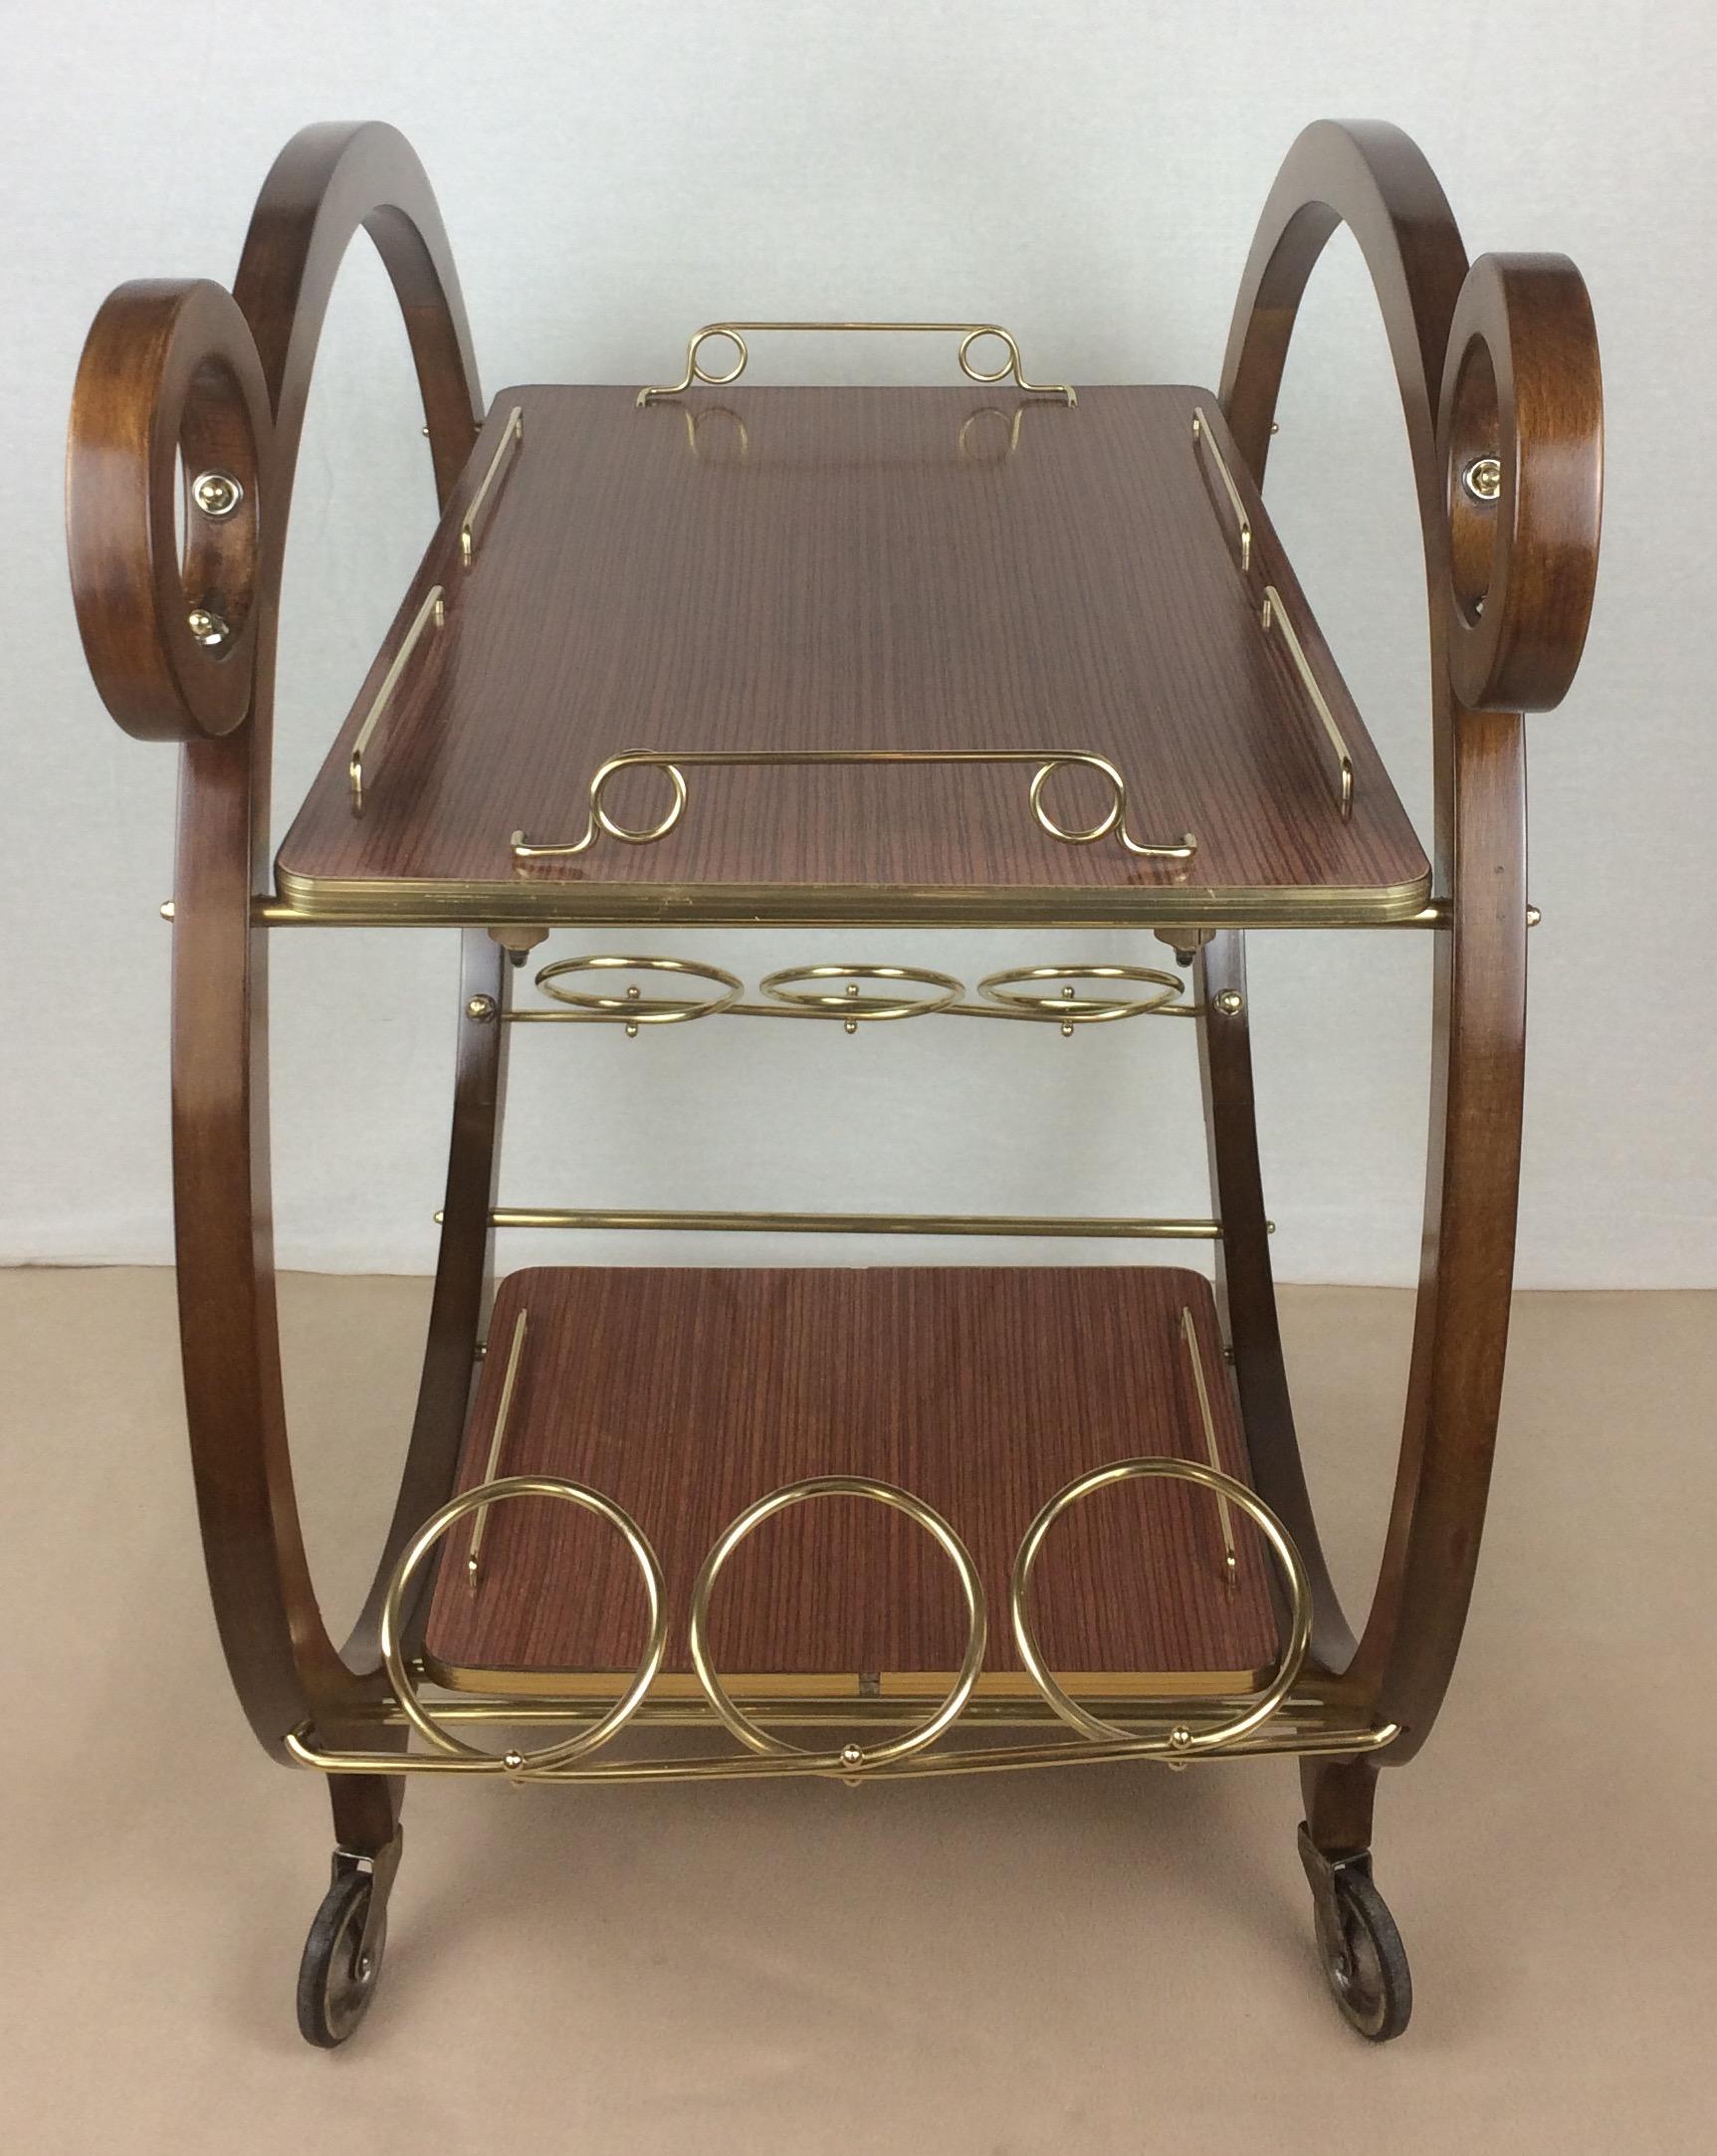 A rare French bar cart or drinks trolley restored to perfection.  Designed by La Maison Dinett of Paris, France, circa 1940s. Unique wooden round frame featuring gorgeous details.  The birch wood makes this piece very strong. 

There are 6 bottle